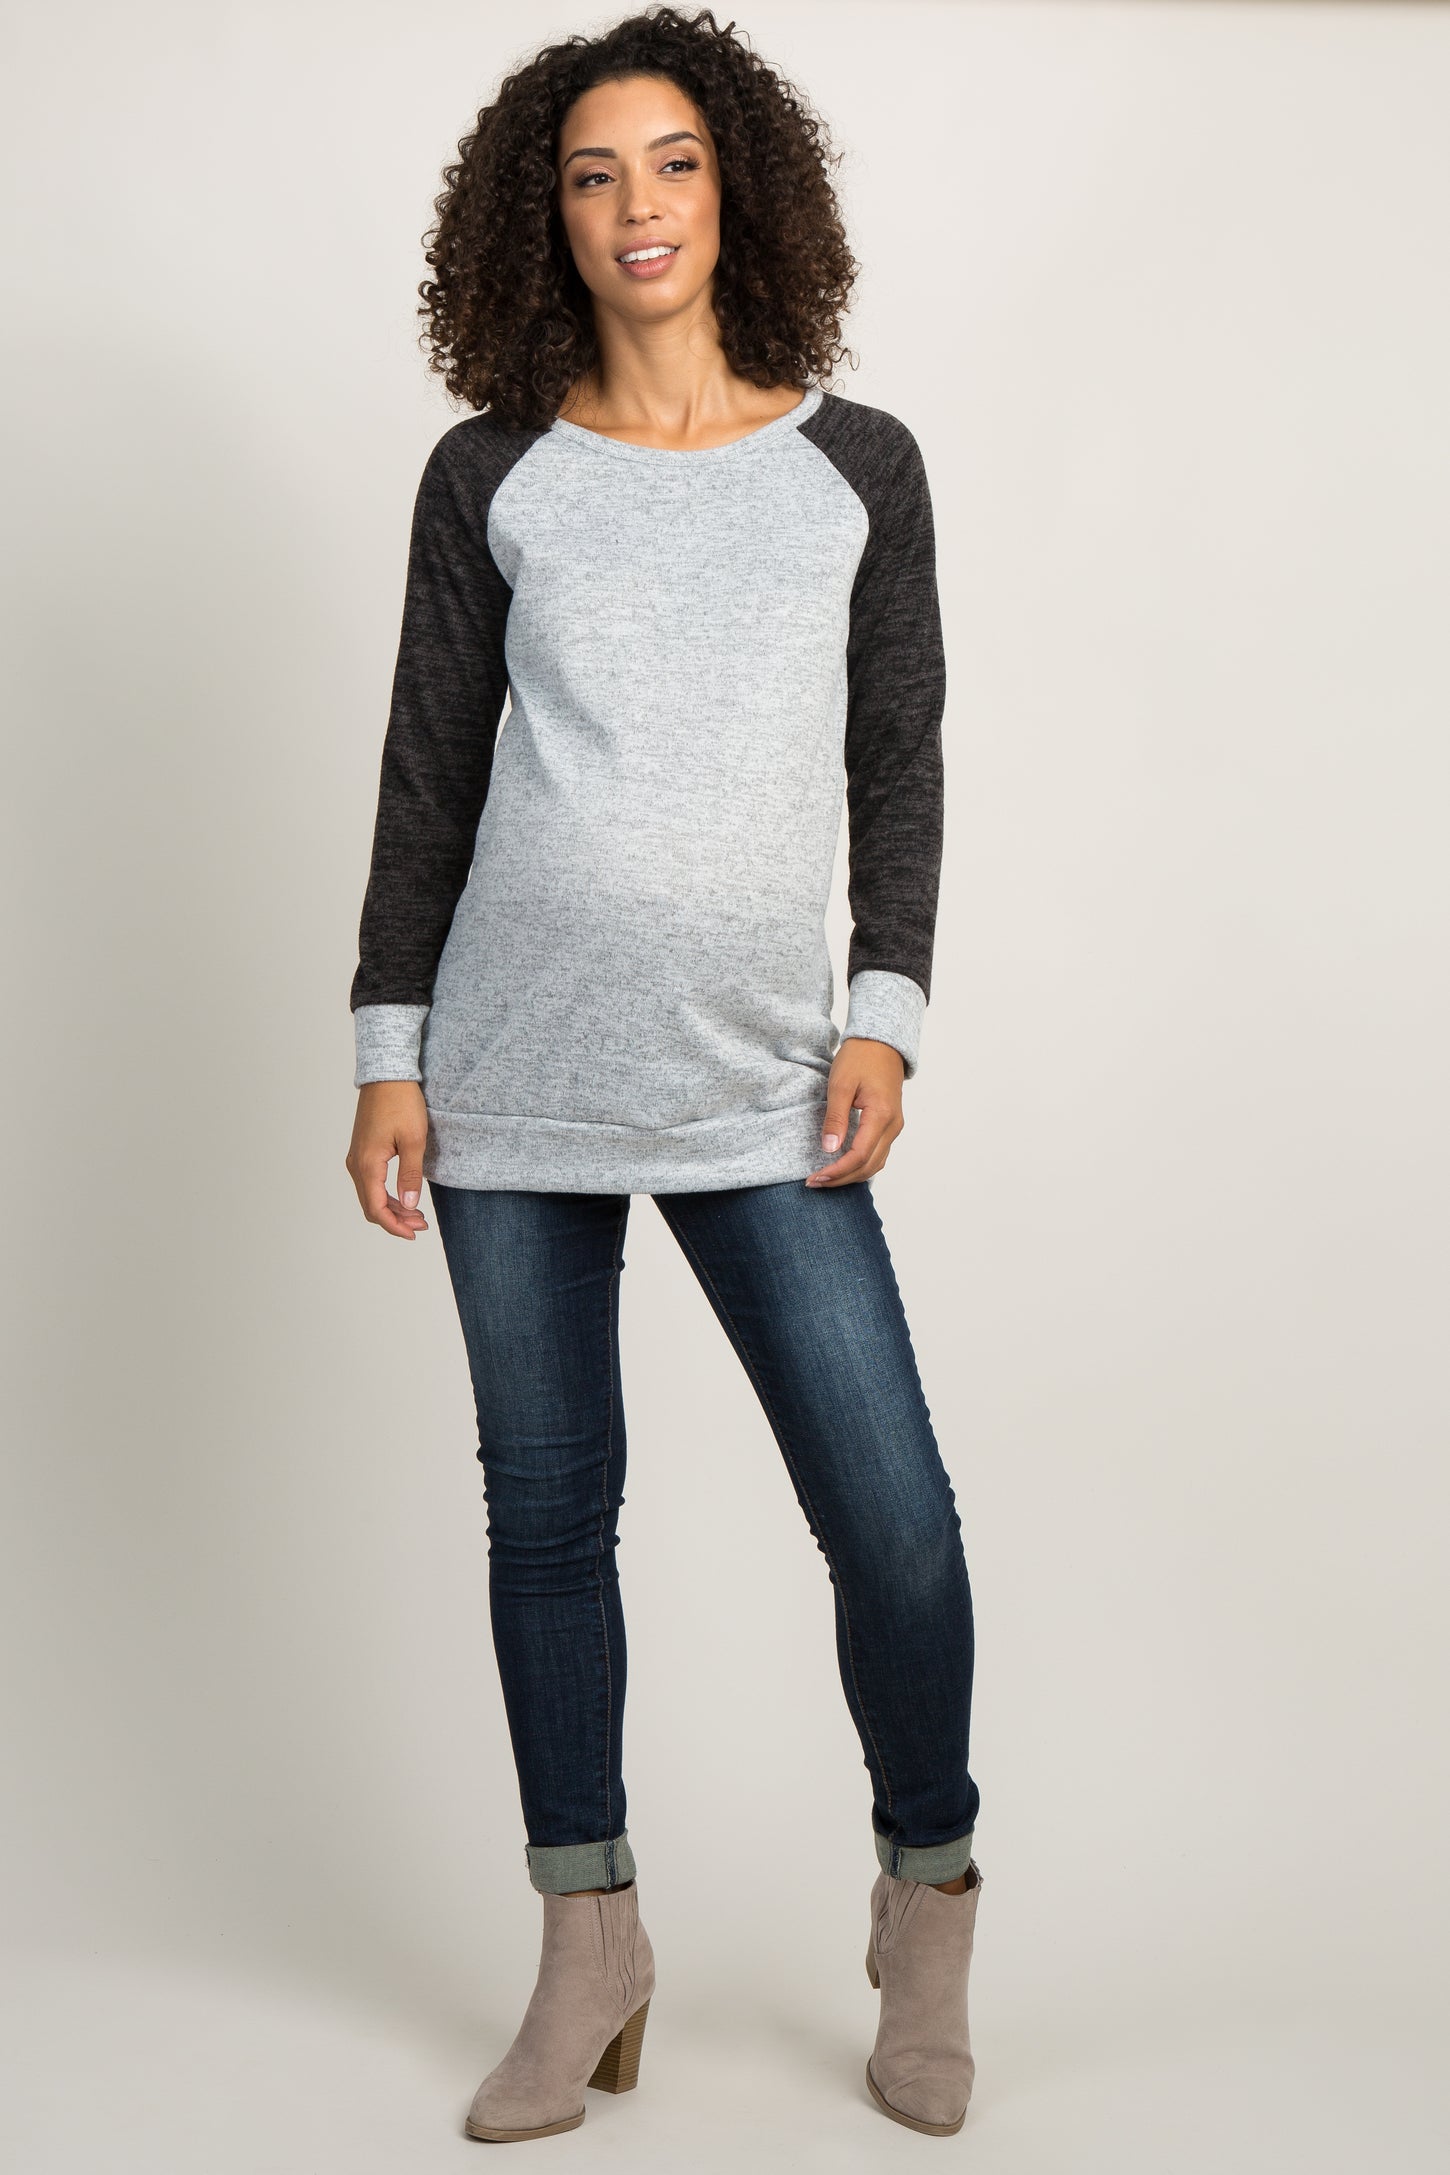 Black Colorblock Soft Knit Elbow Patch Maternity Top